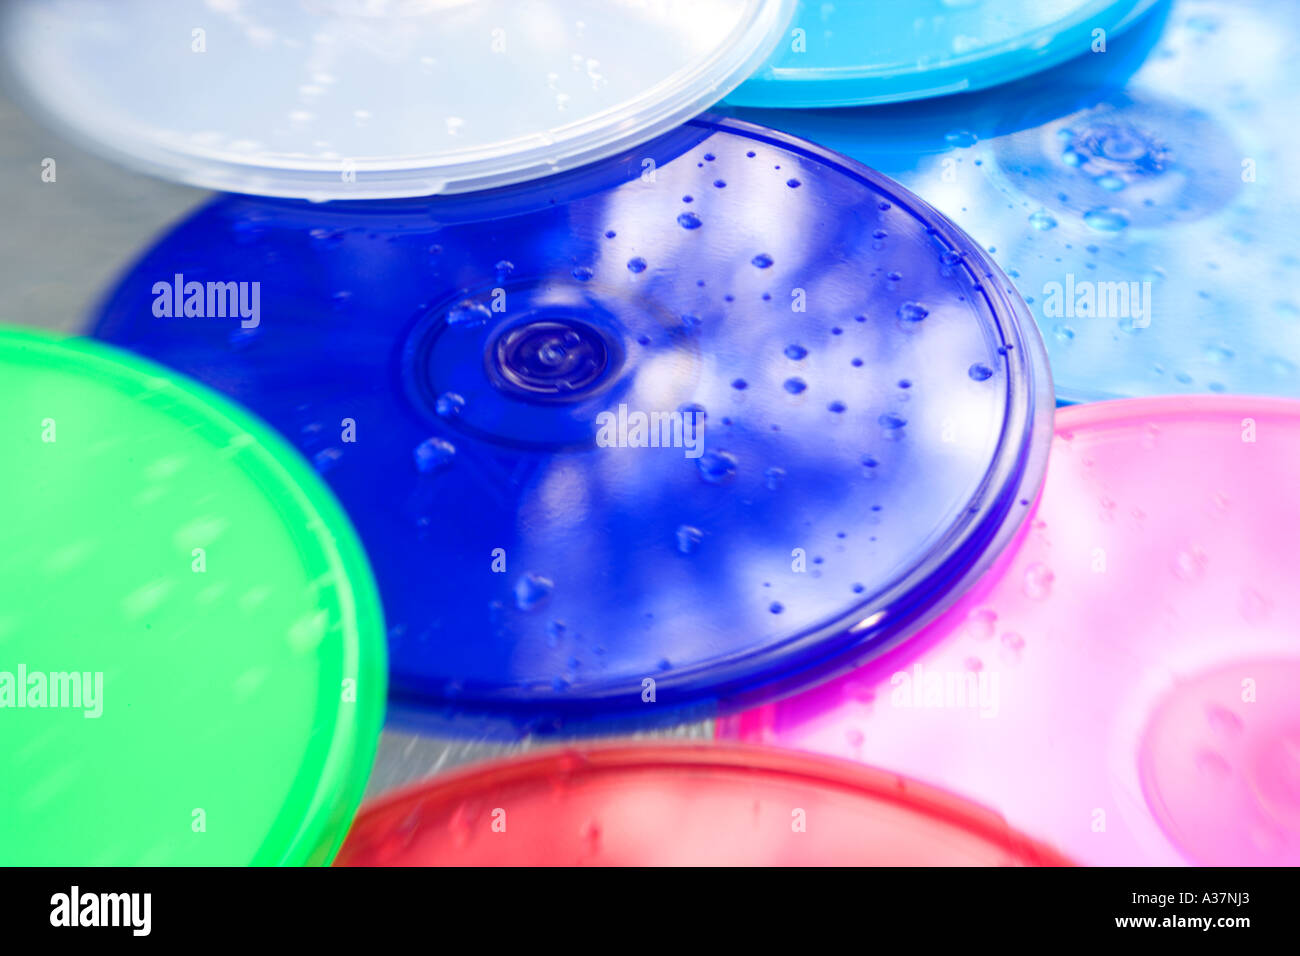 CD DVD container PODZ product beside pool splashed with water Stock Photo